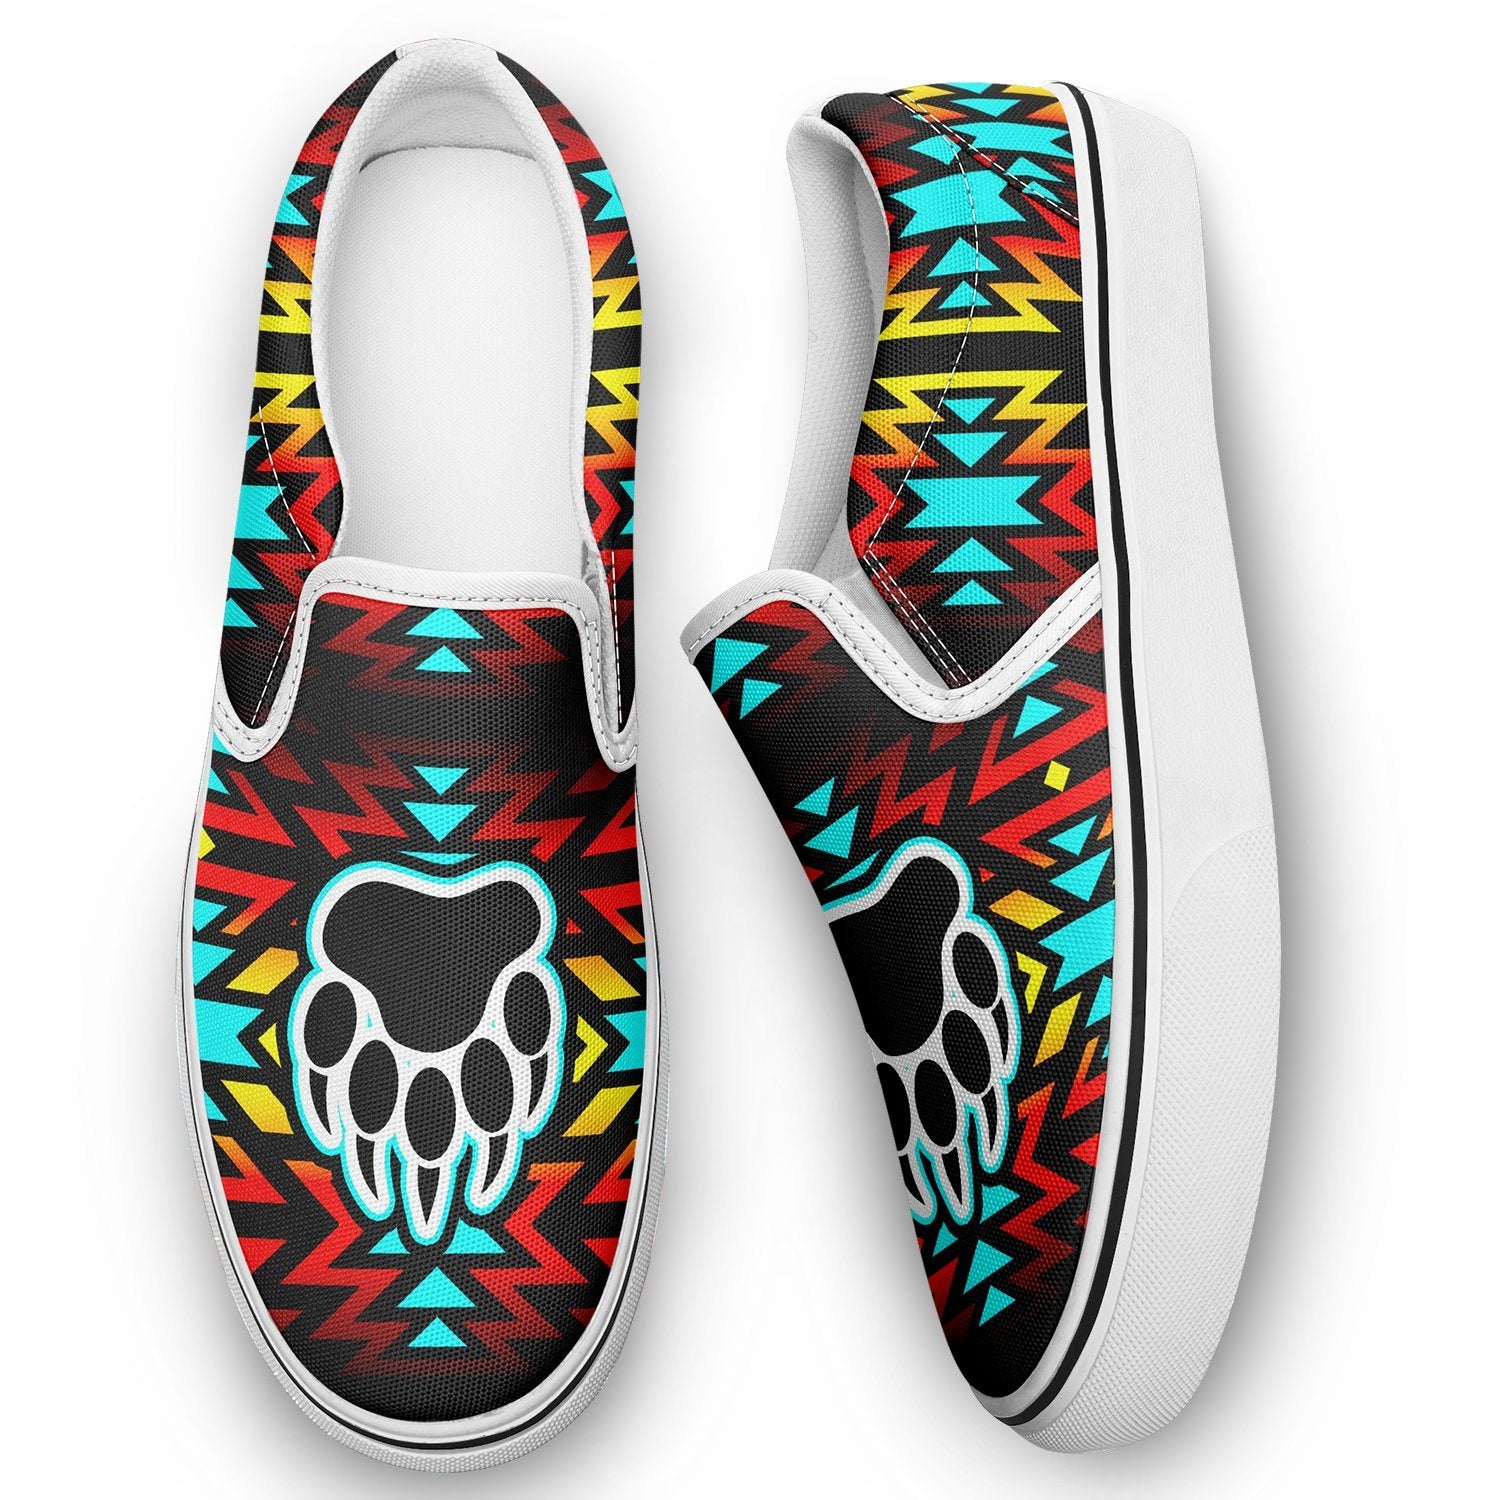 Fire Colors and Turquoise Bearpaw Otoyimm Canvas Slip On Shoes 49 Dzine 